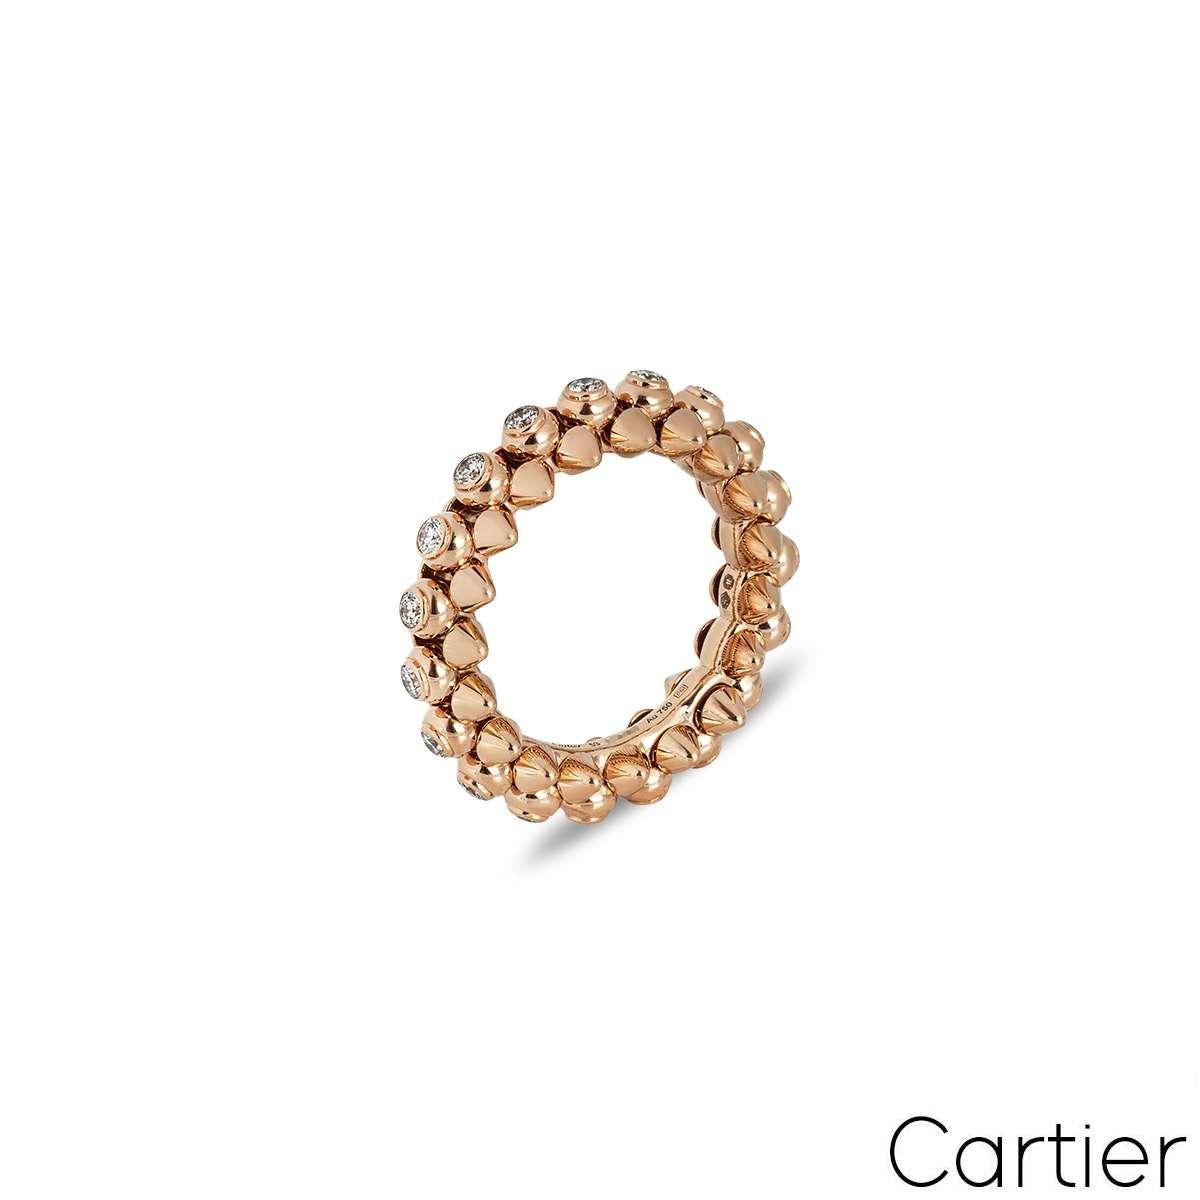 An 18k rose gold ring, from Cartier's Clash de Cartier collection. The rings design is composed of the centre being set throughout with 18 brilliant-cut diamonds totalling 0.53ct which are complemented by a stud design on either side. Weighing 10.51